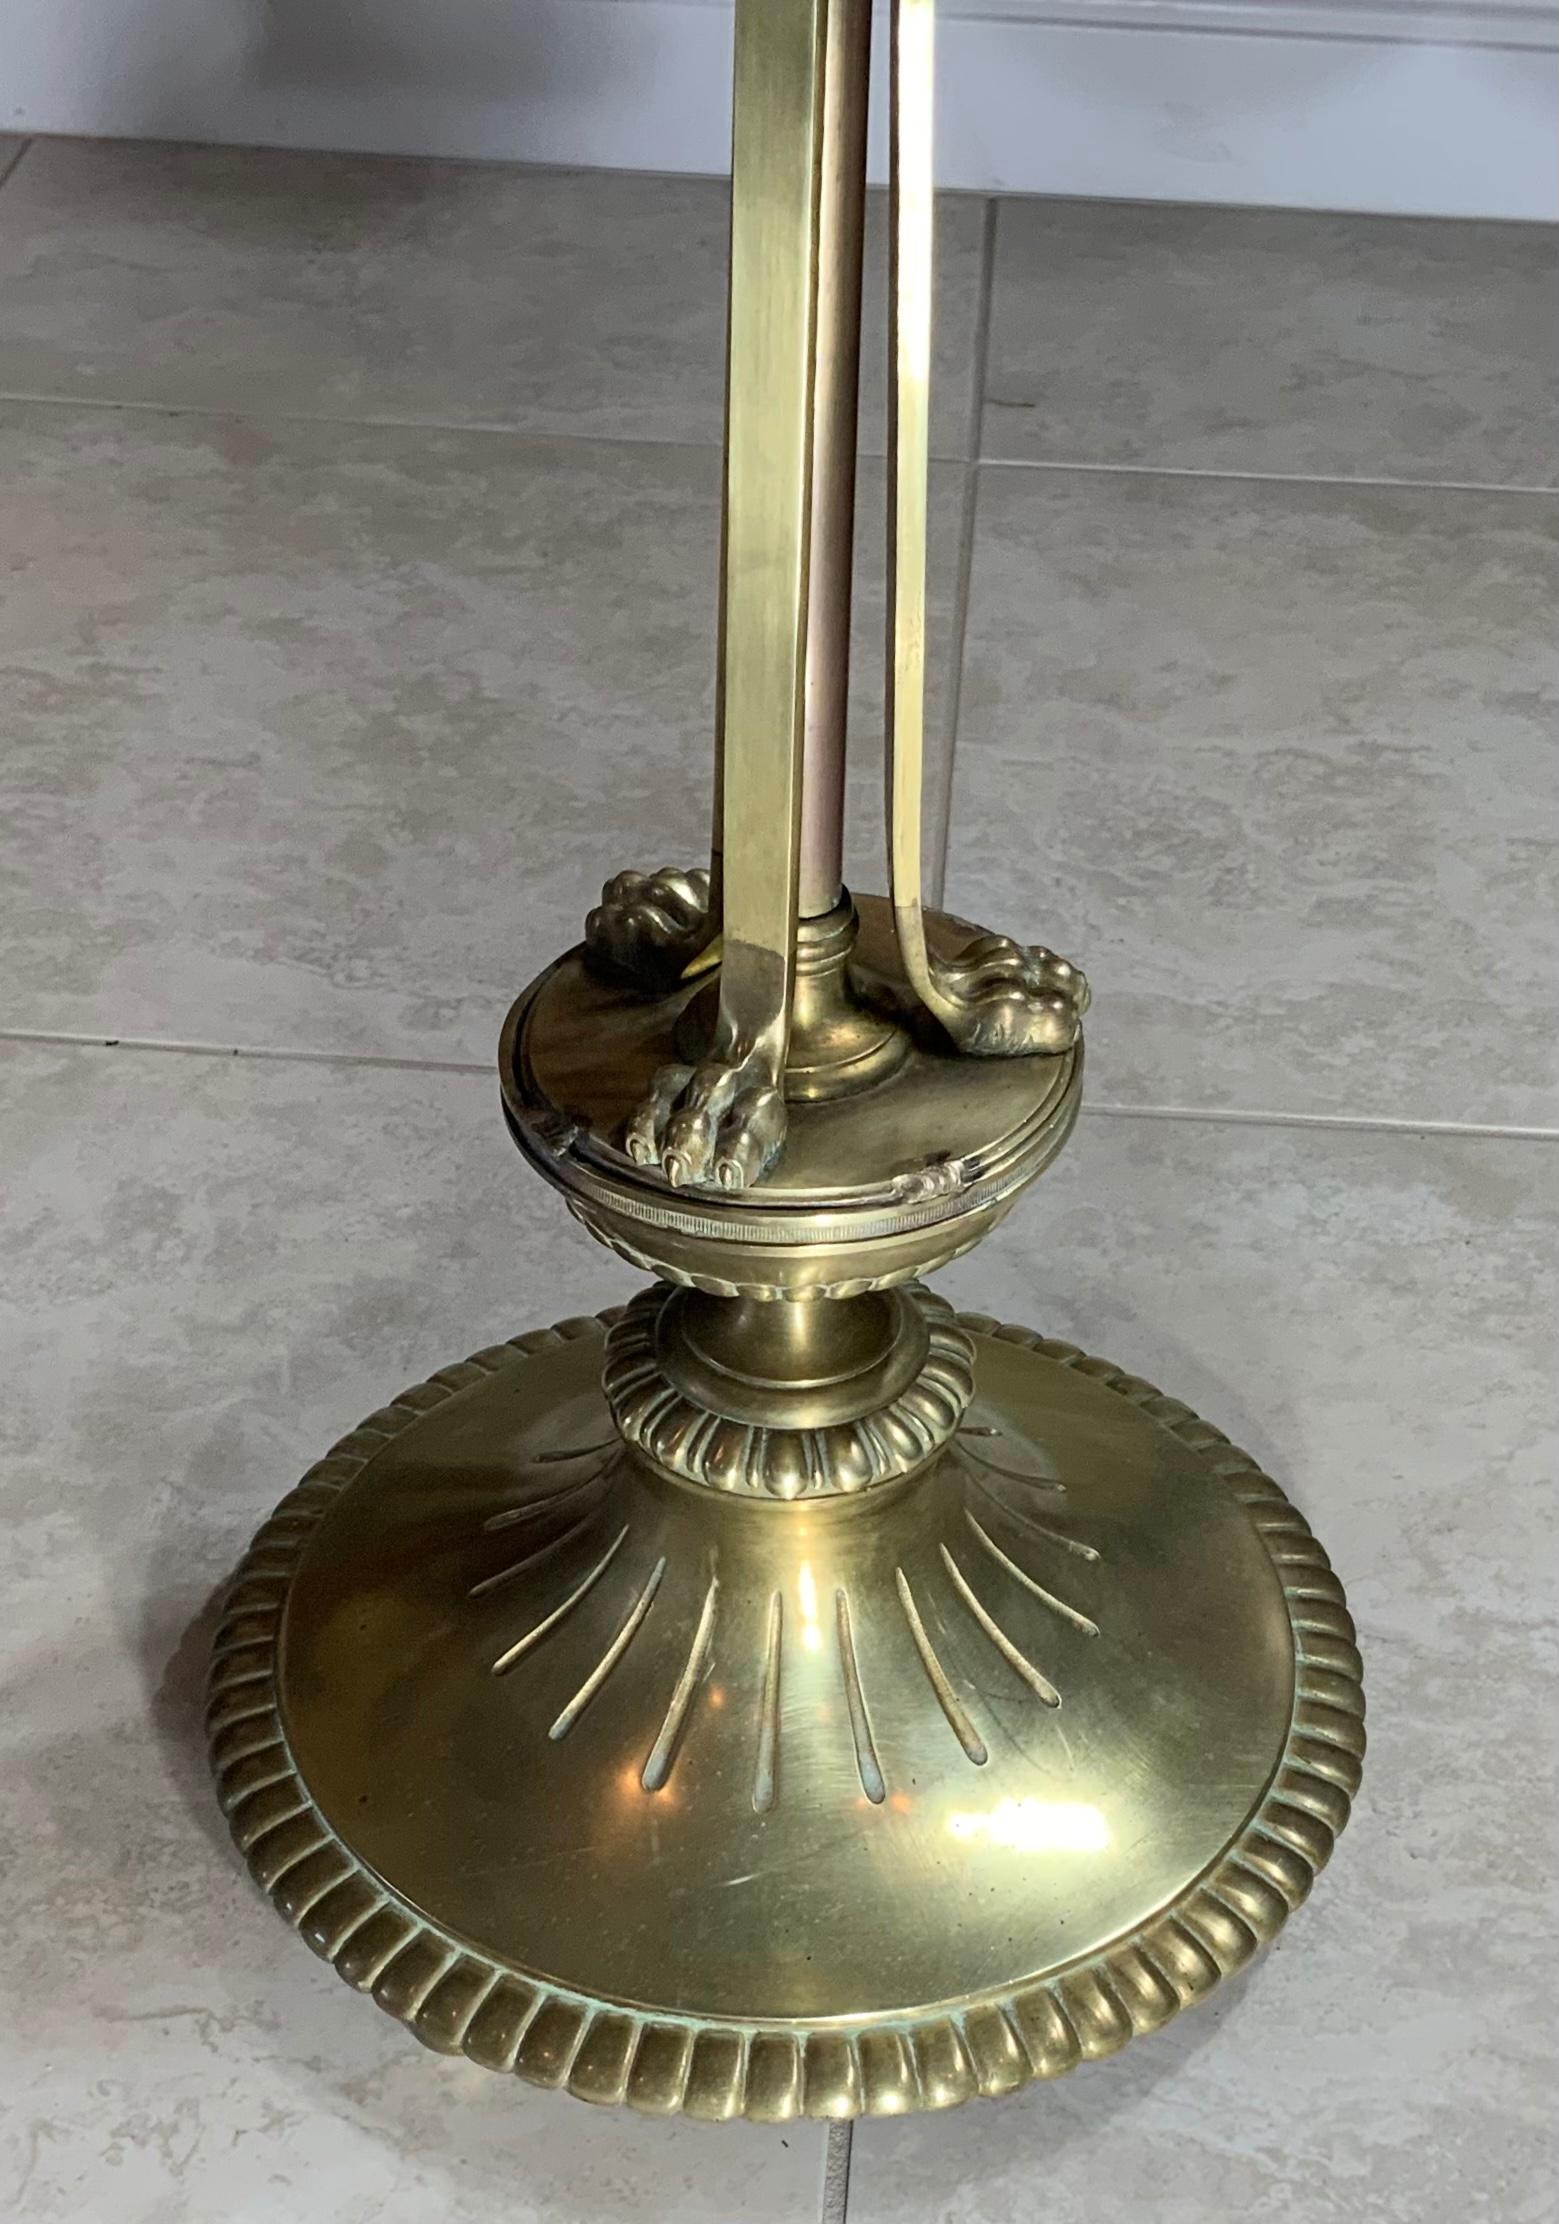 Funky table base made of solid brass with three decorative claw legs . Custom-made steel plate top, that can take marble glass, or wood top.
The brass base was originally salvaged from vintage English floor lamp / to become one of a kind table